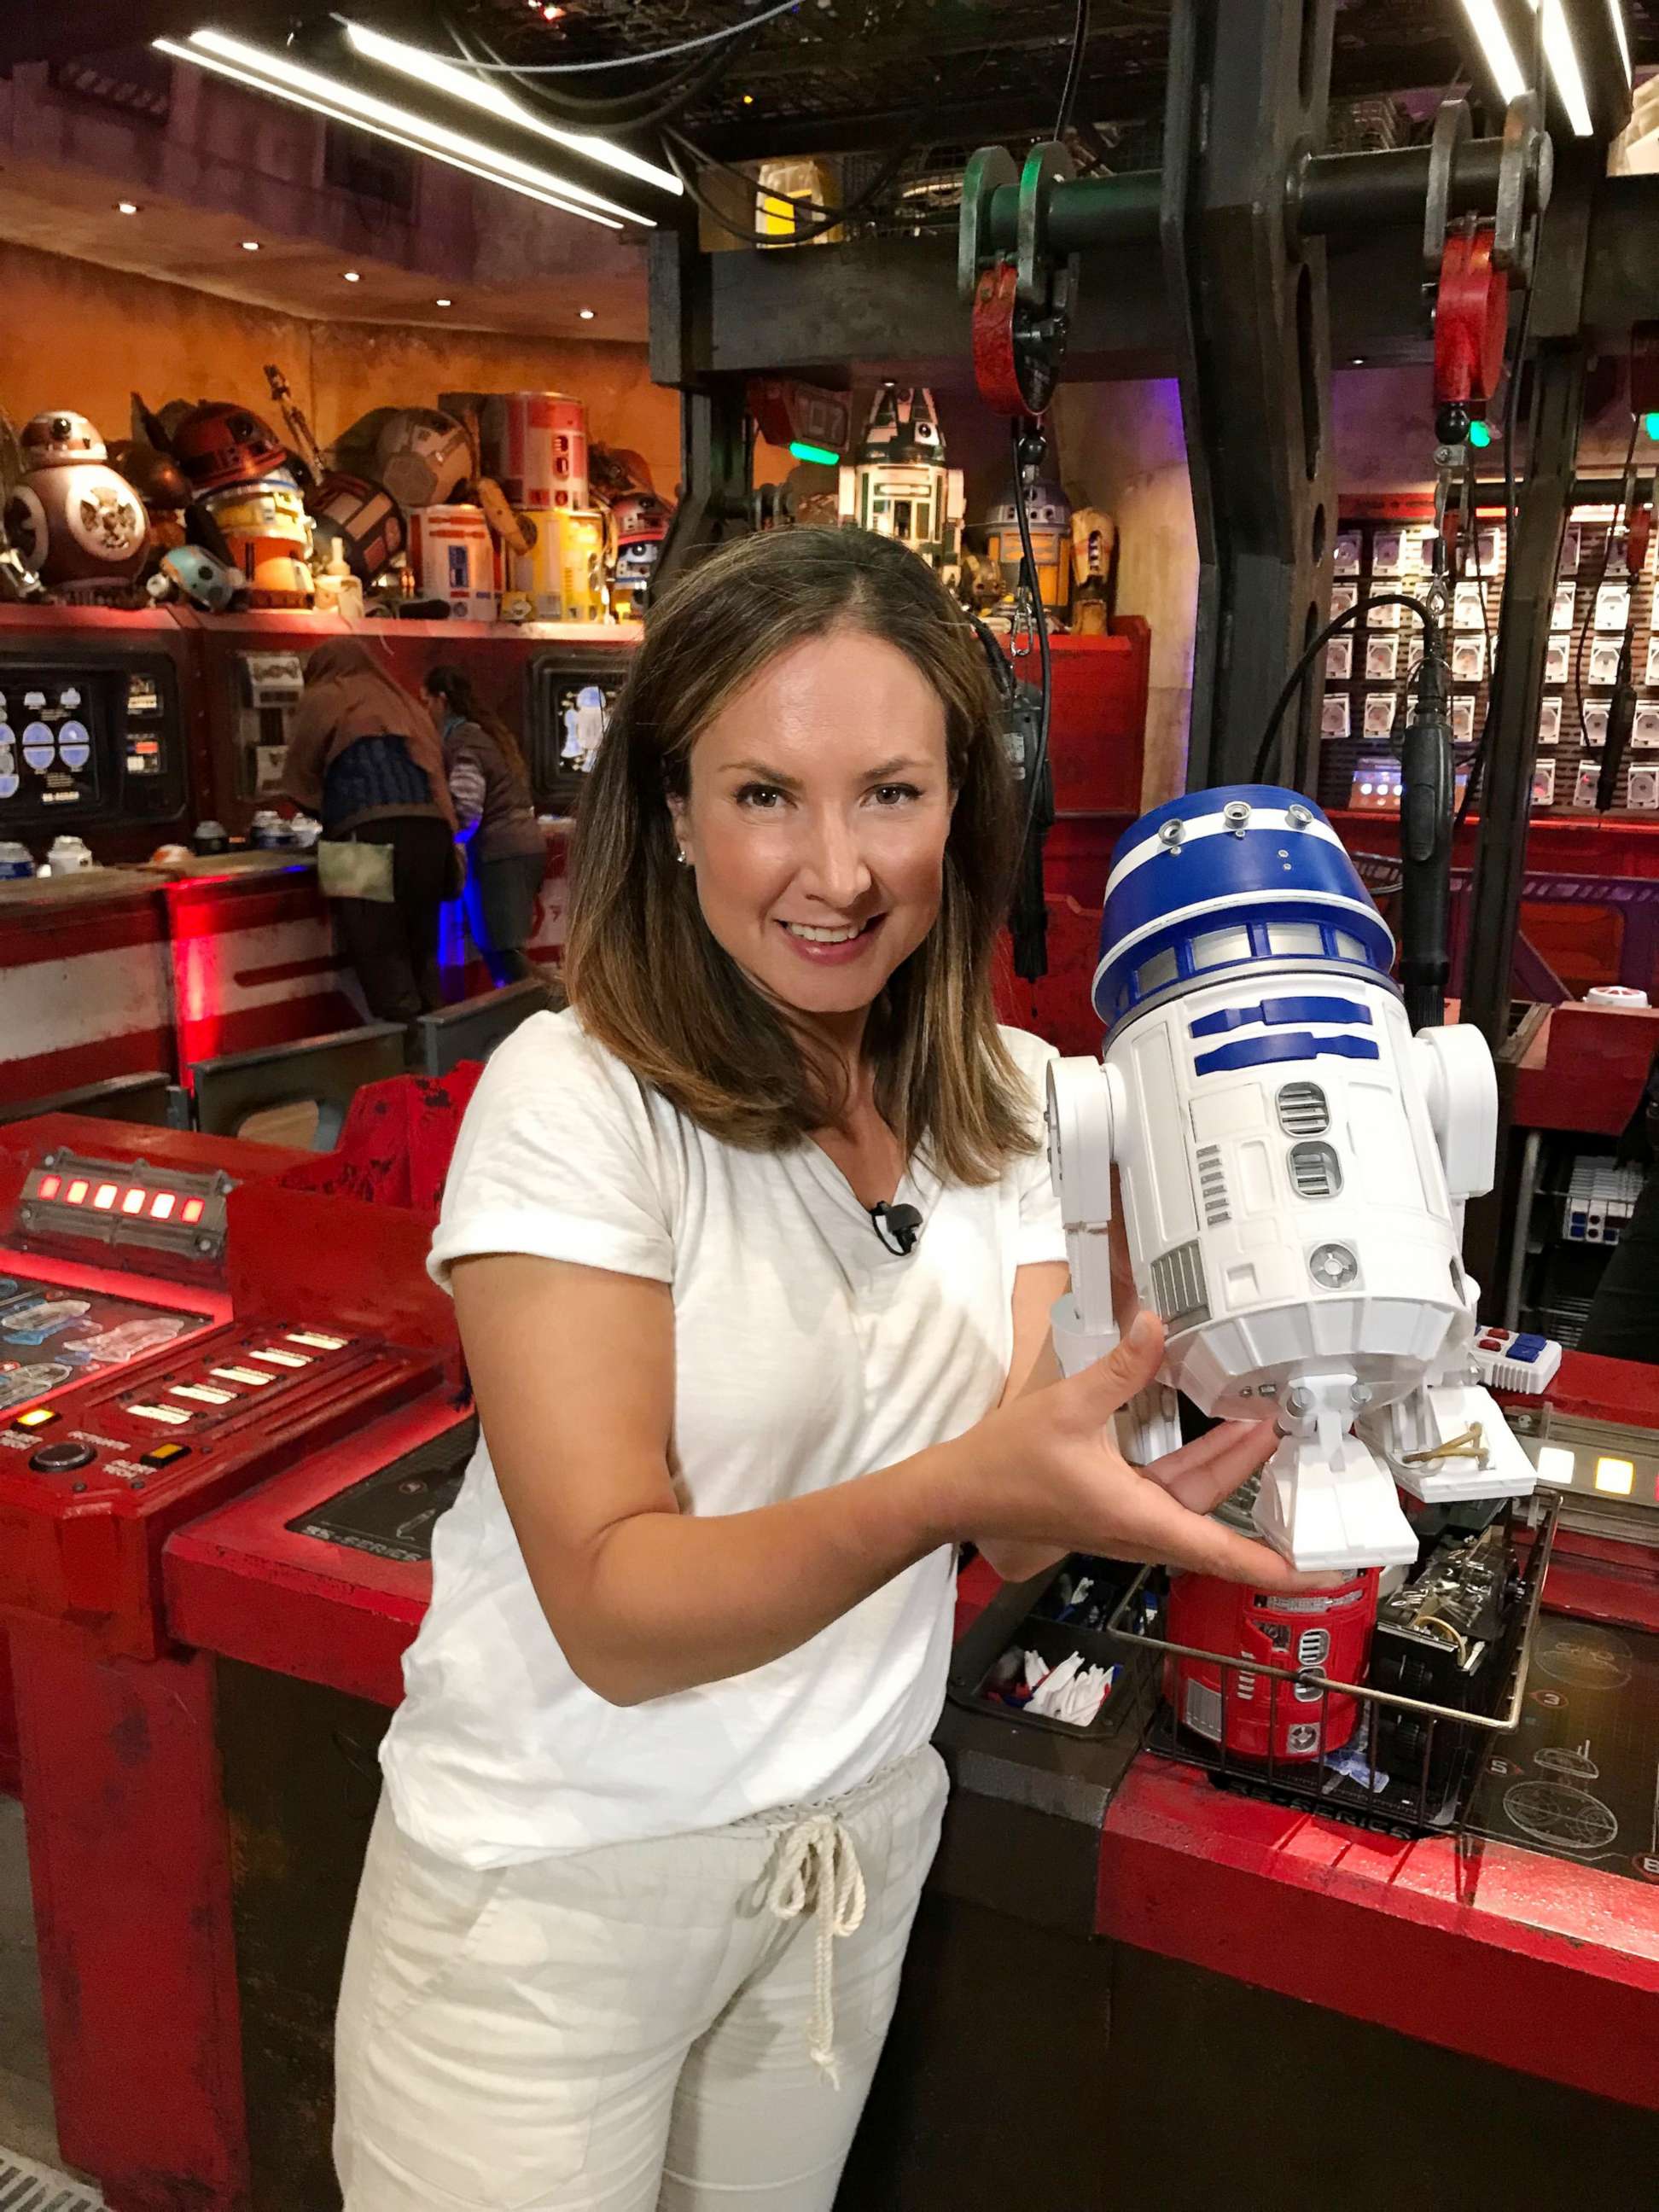 PHOTO:  GMA built a droid at the Droid Depot at the brand-new Star Wars Galaxy’s Edge.